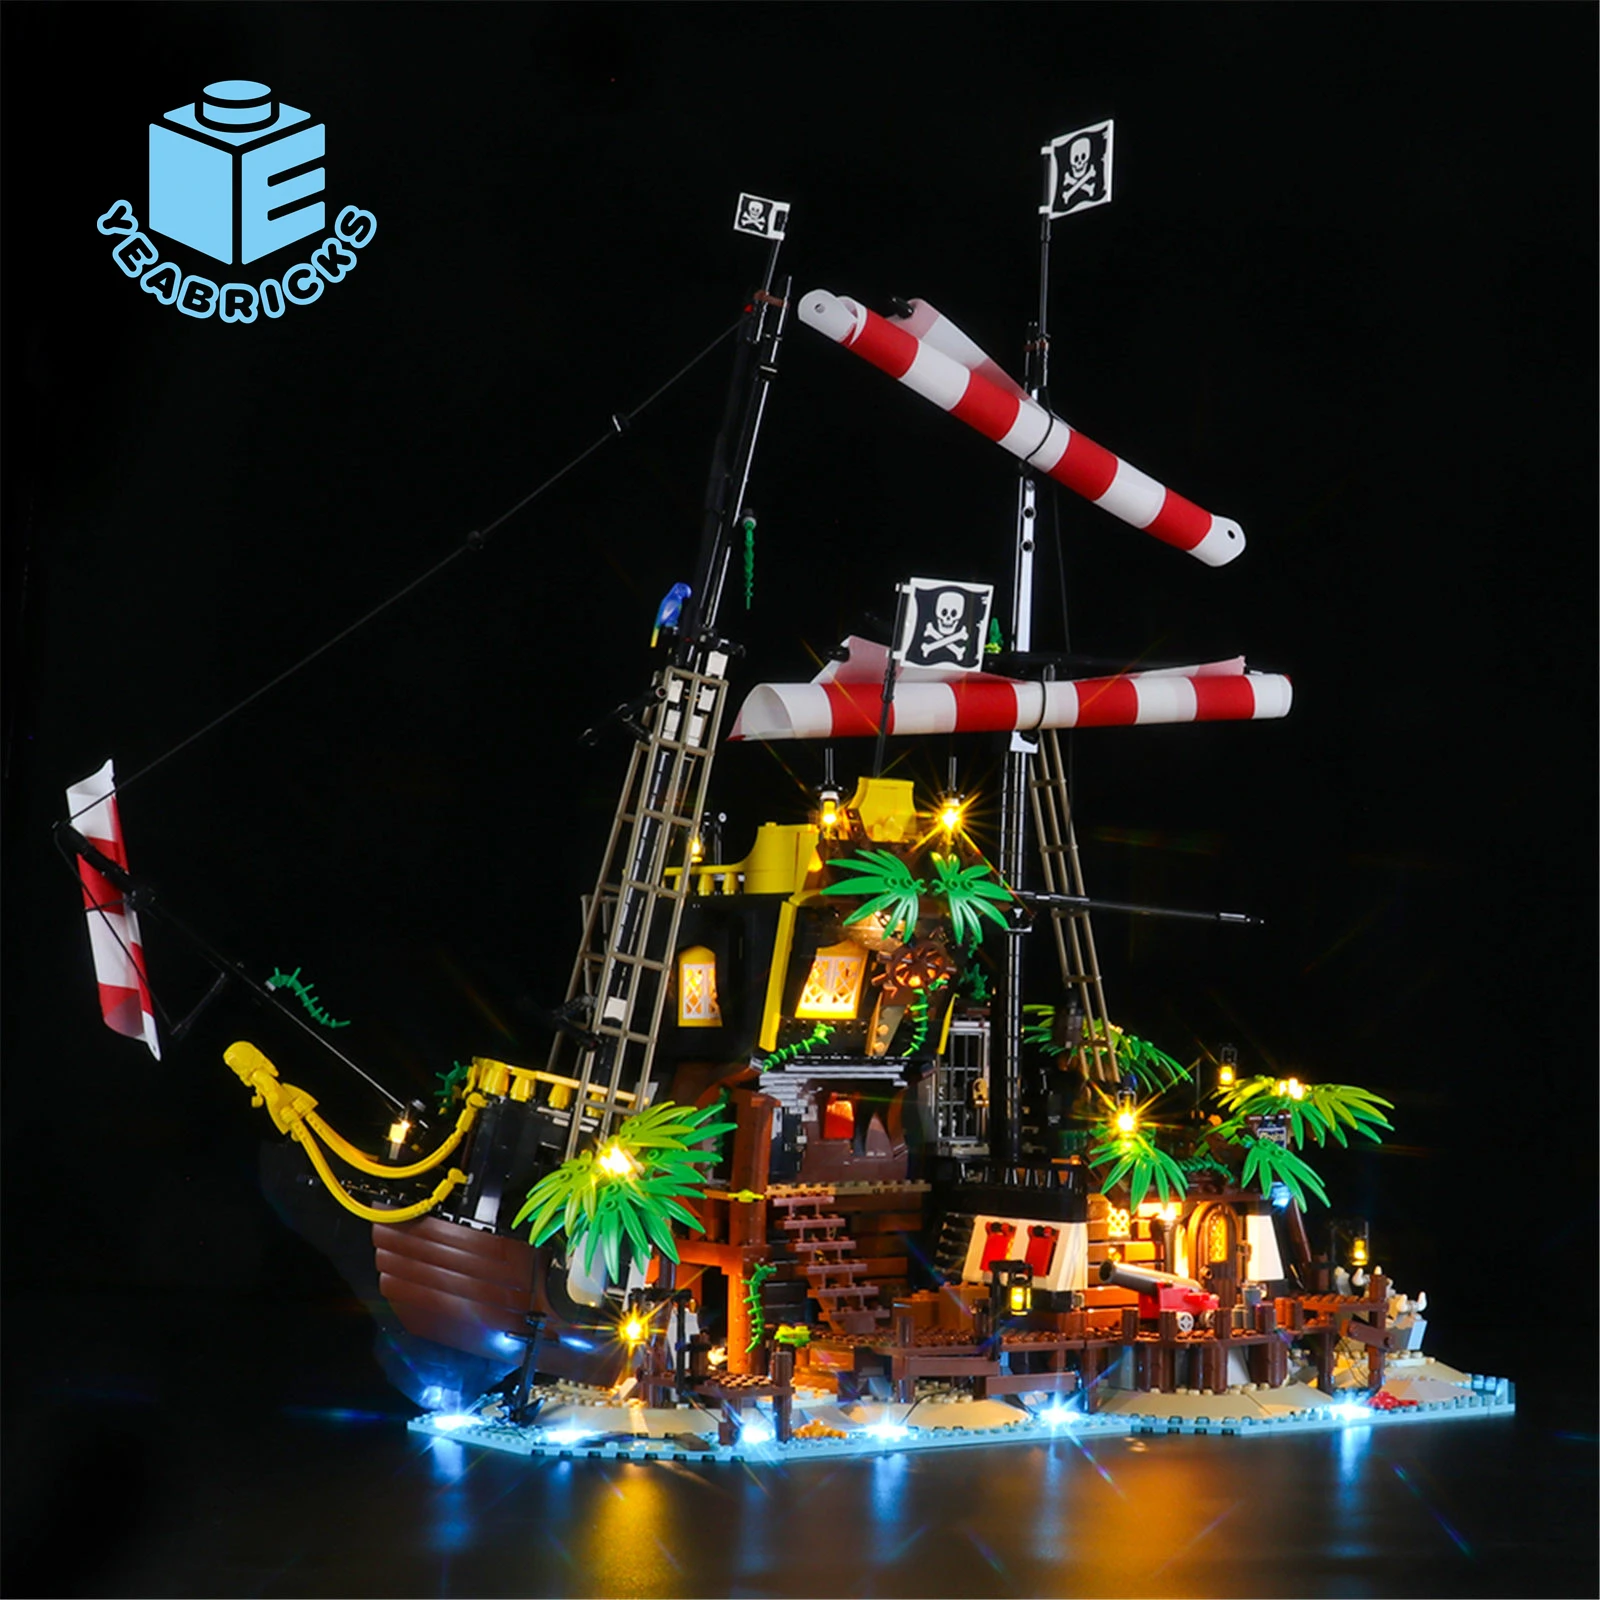 YEABRICKS LED Light Kit for 21322 Pirates of Barracuda Bay Building Blocks Set (NOT Include the Model) Toys for Children